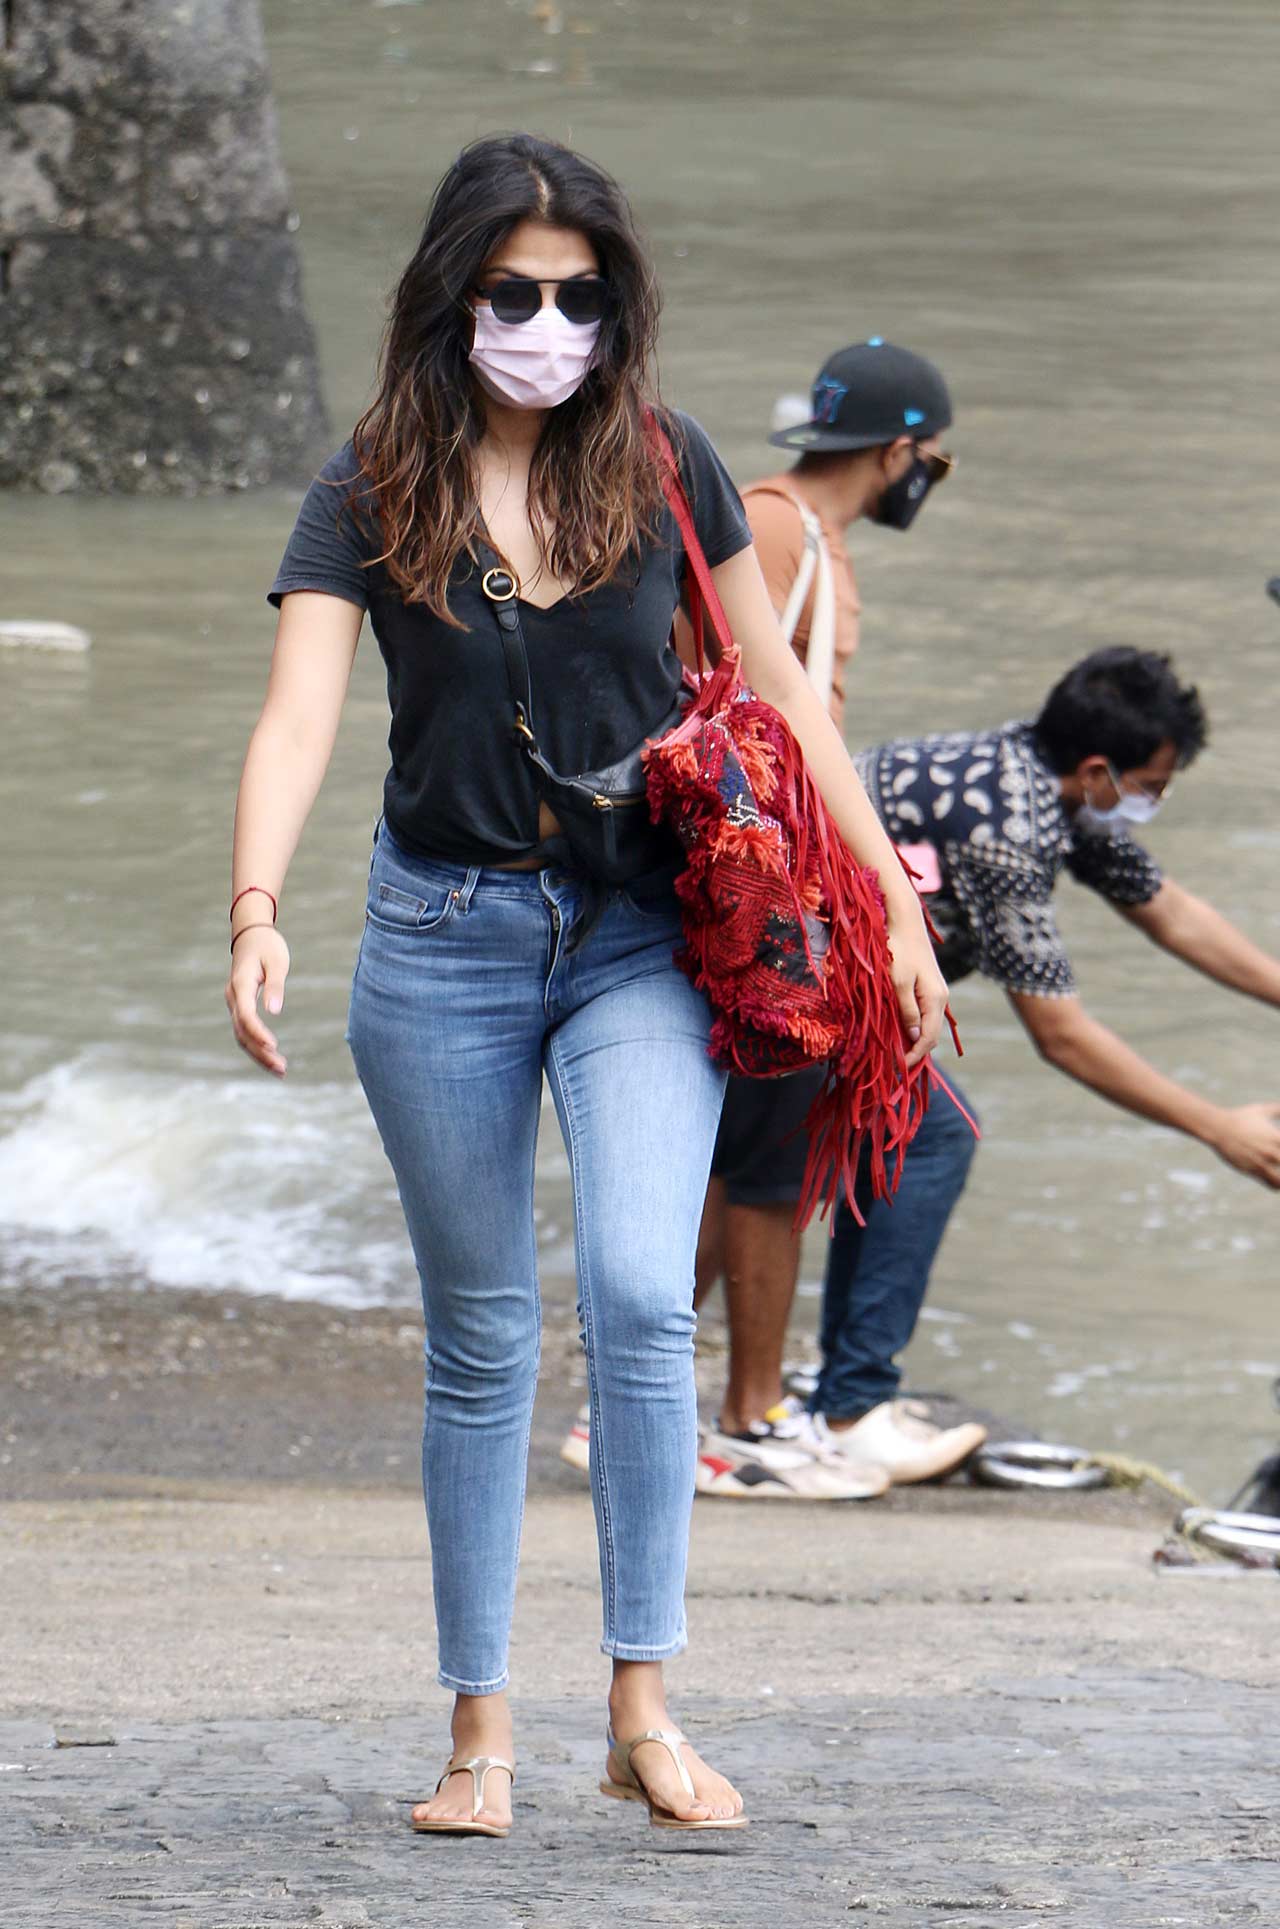 Rhea Chakraborty was spotted at the Gateway of India in a causal avatar. She could be seen donning a black top and blue jeans. Her next release as an actor is Chehre, which stars Amitabh Bachchan and Emraan Hashmi. The actress was last seen in 2018’s Jalebi. 
 